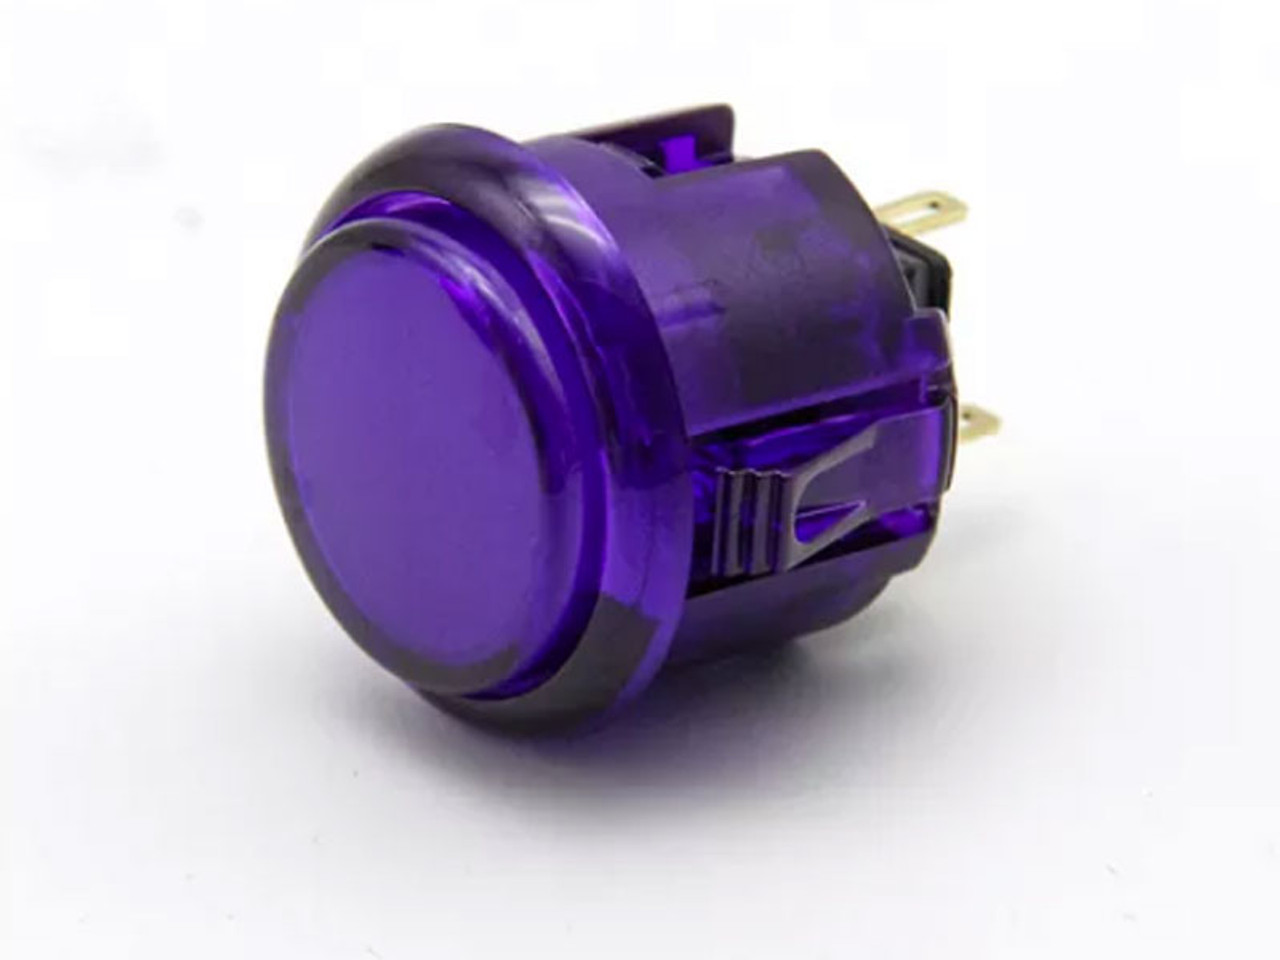 Qanba Gravity 24-KS 24mm Snap-in Clear Mechanical Pushbutton - Clear Violet